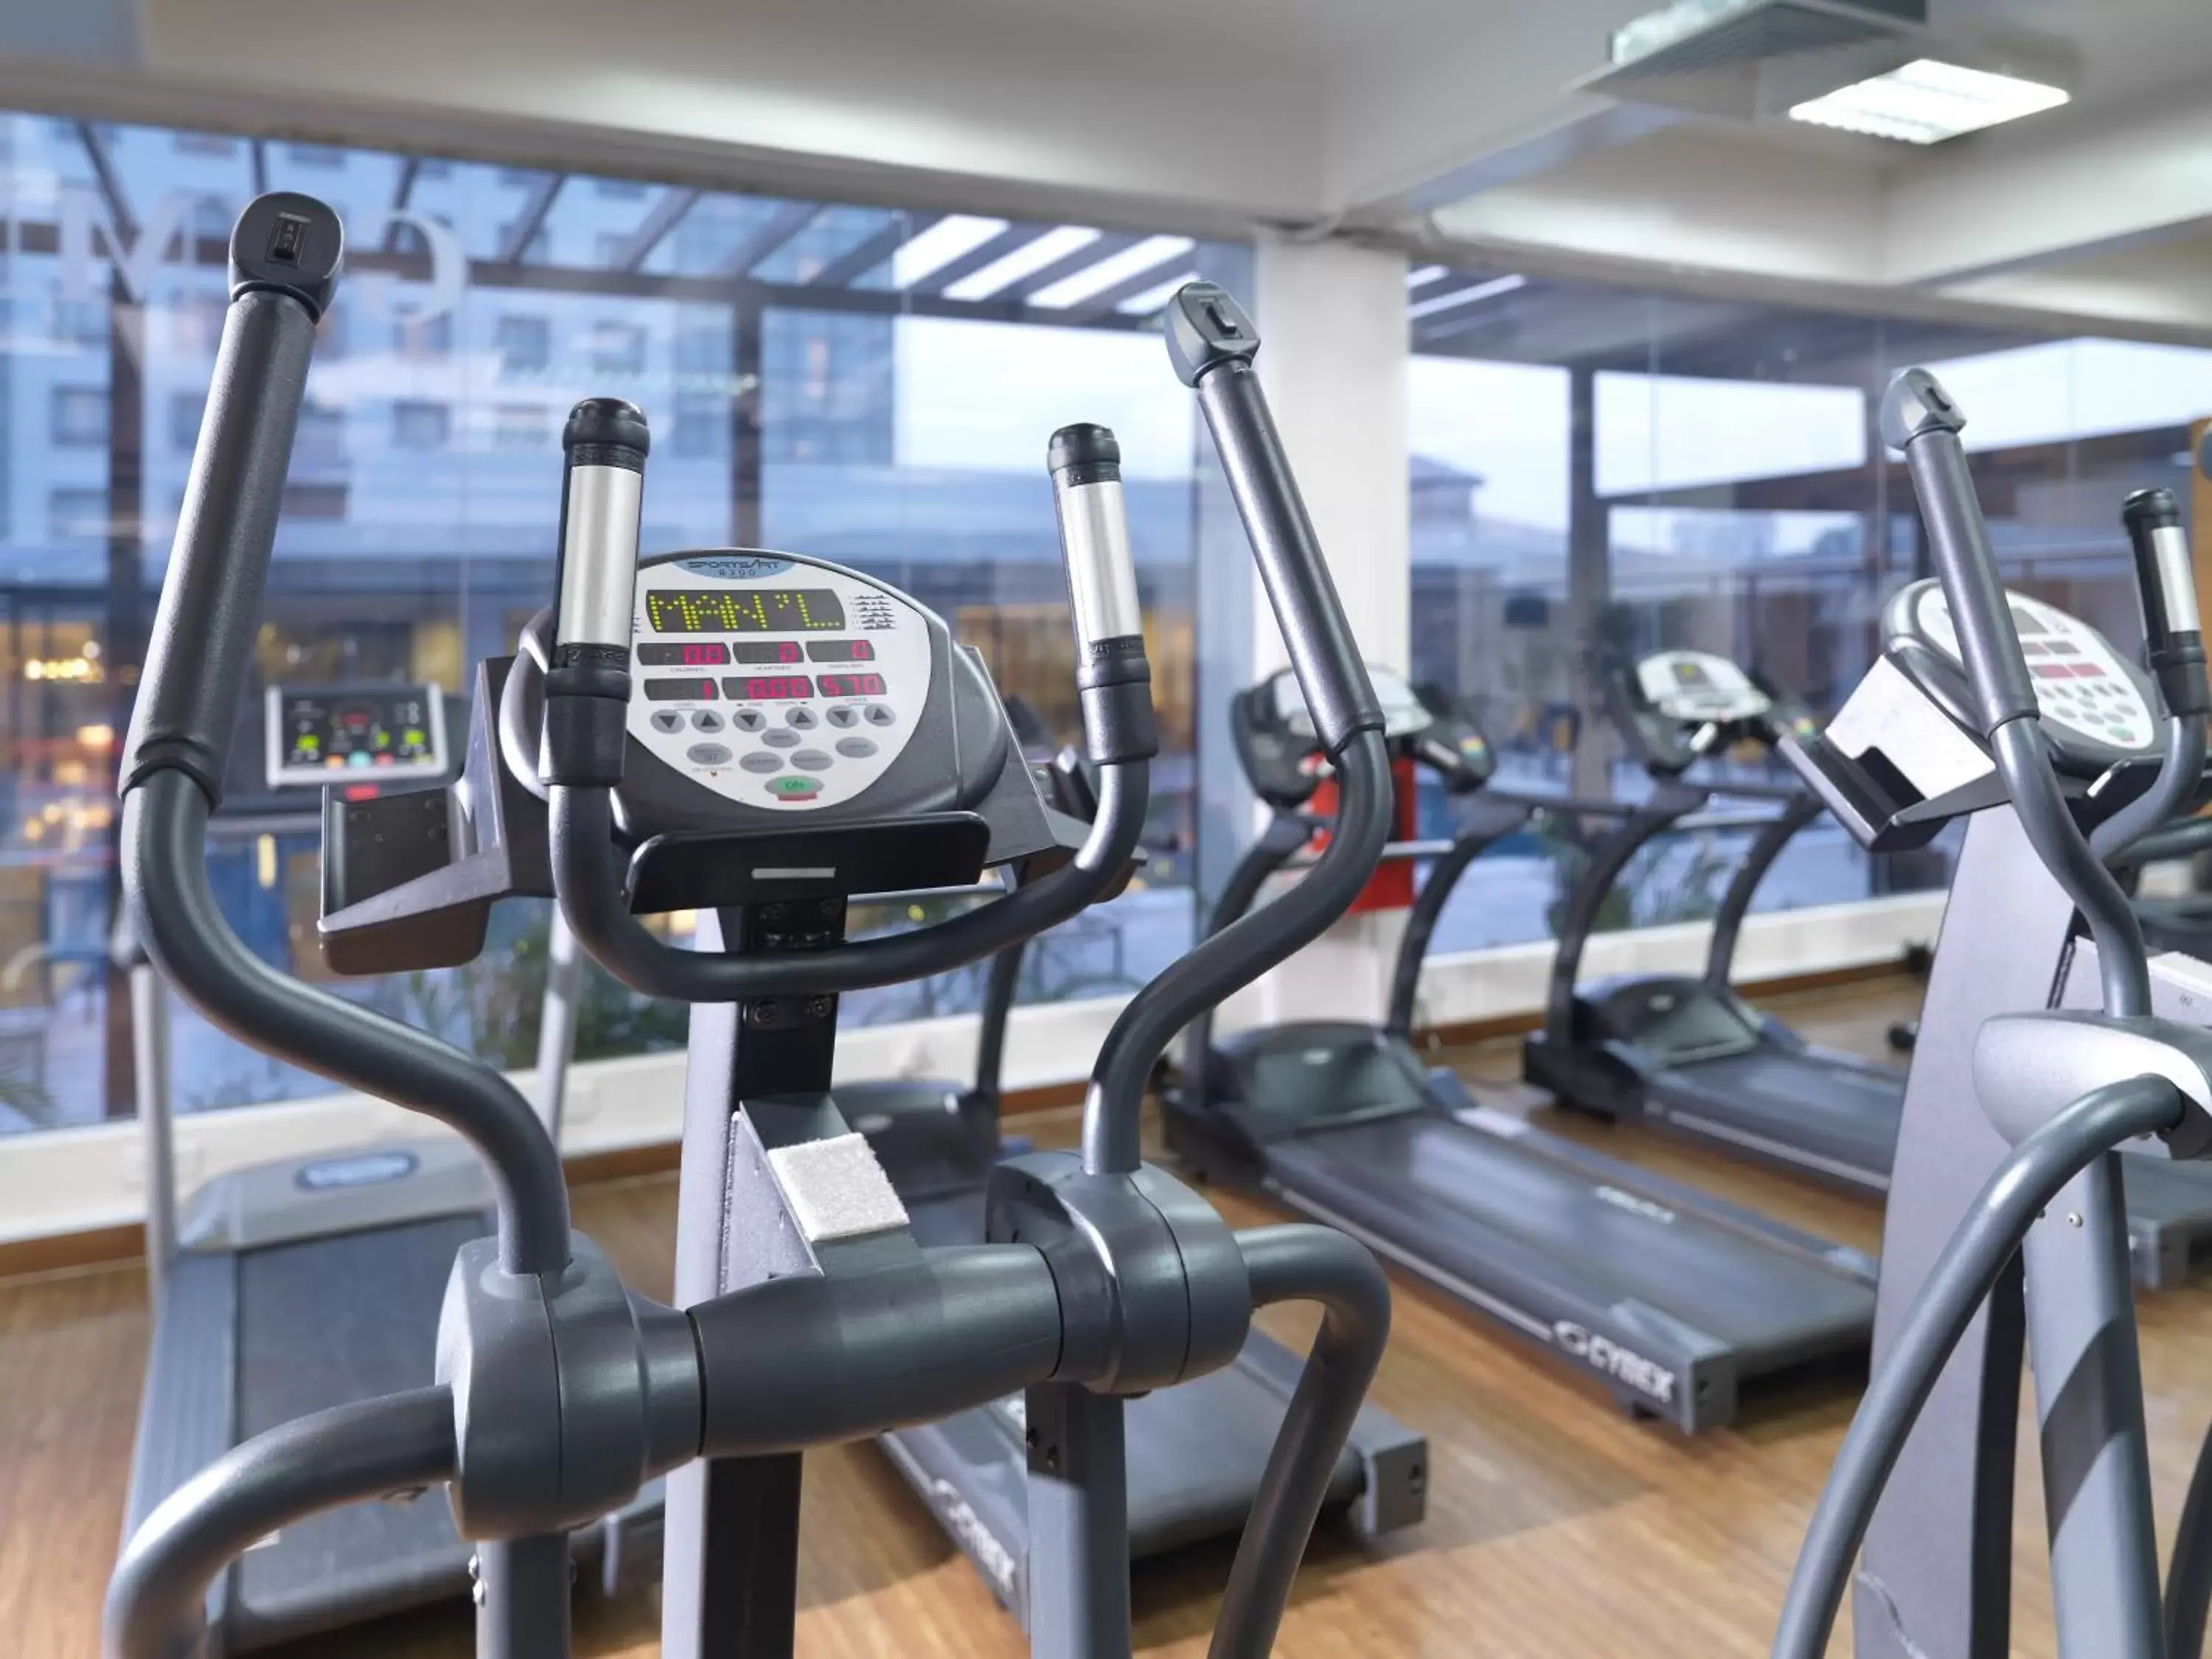 Fitness centre/facilities, Fitness Center/Facilities in St Giles Boulevard